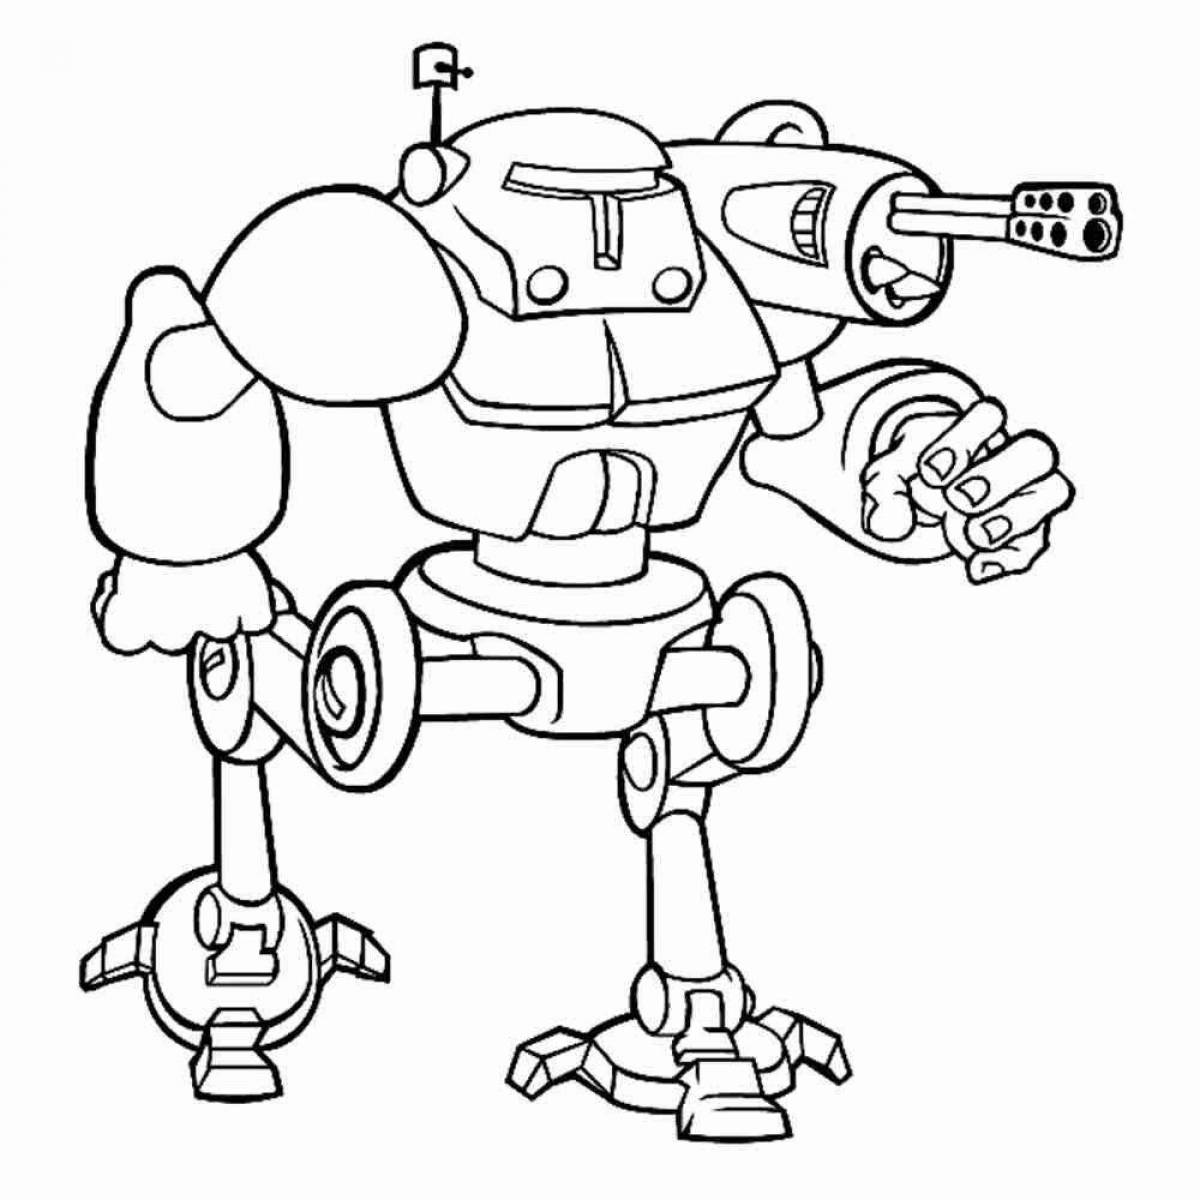 Fun tobot coloring pages for kids